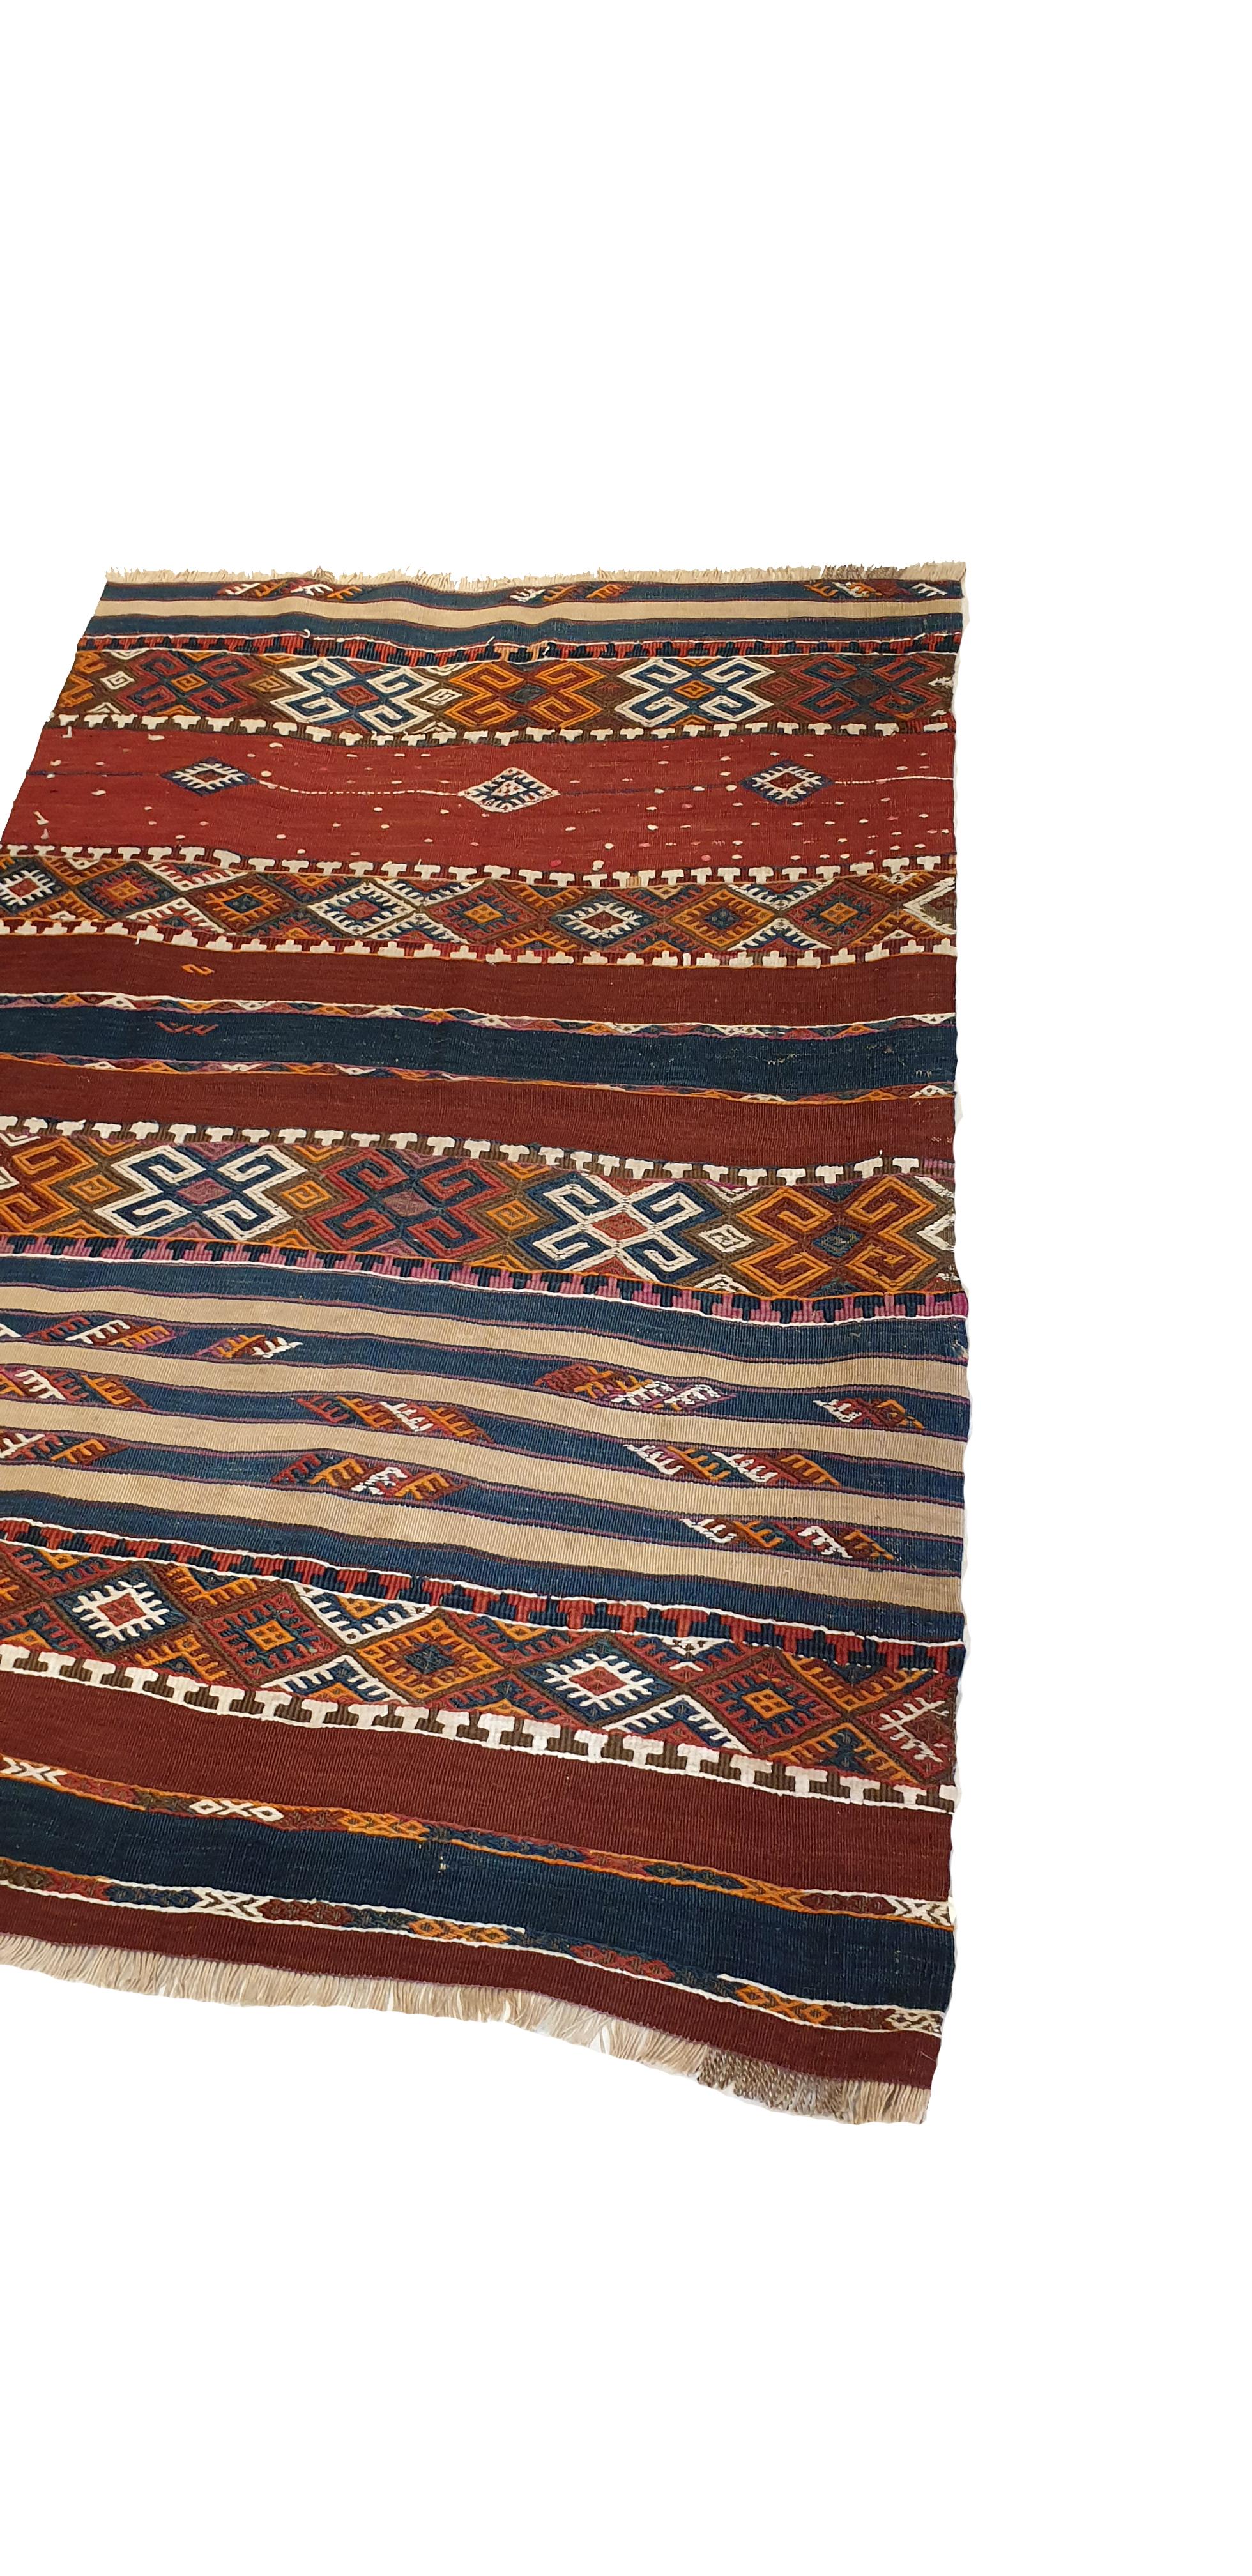 Kilim in Turkey, representing tribal style geometric shapes.
High quality, beautiful graphics and remarkable finesse.

Perfect state of preservation.

Measures: 62.99 in. x 37.40 in.


kilim en Turquie, représentant des formes géométriques du style